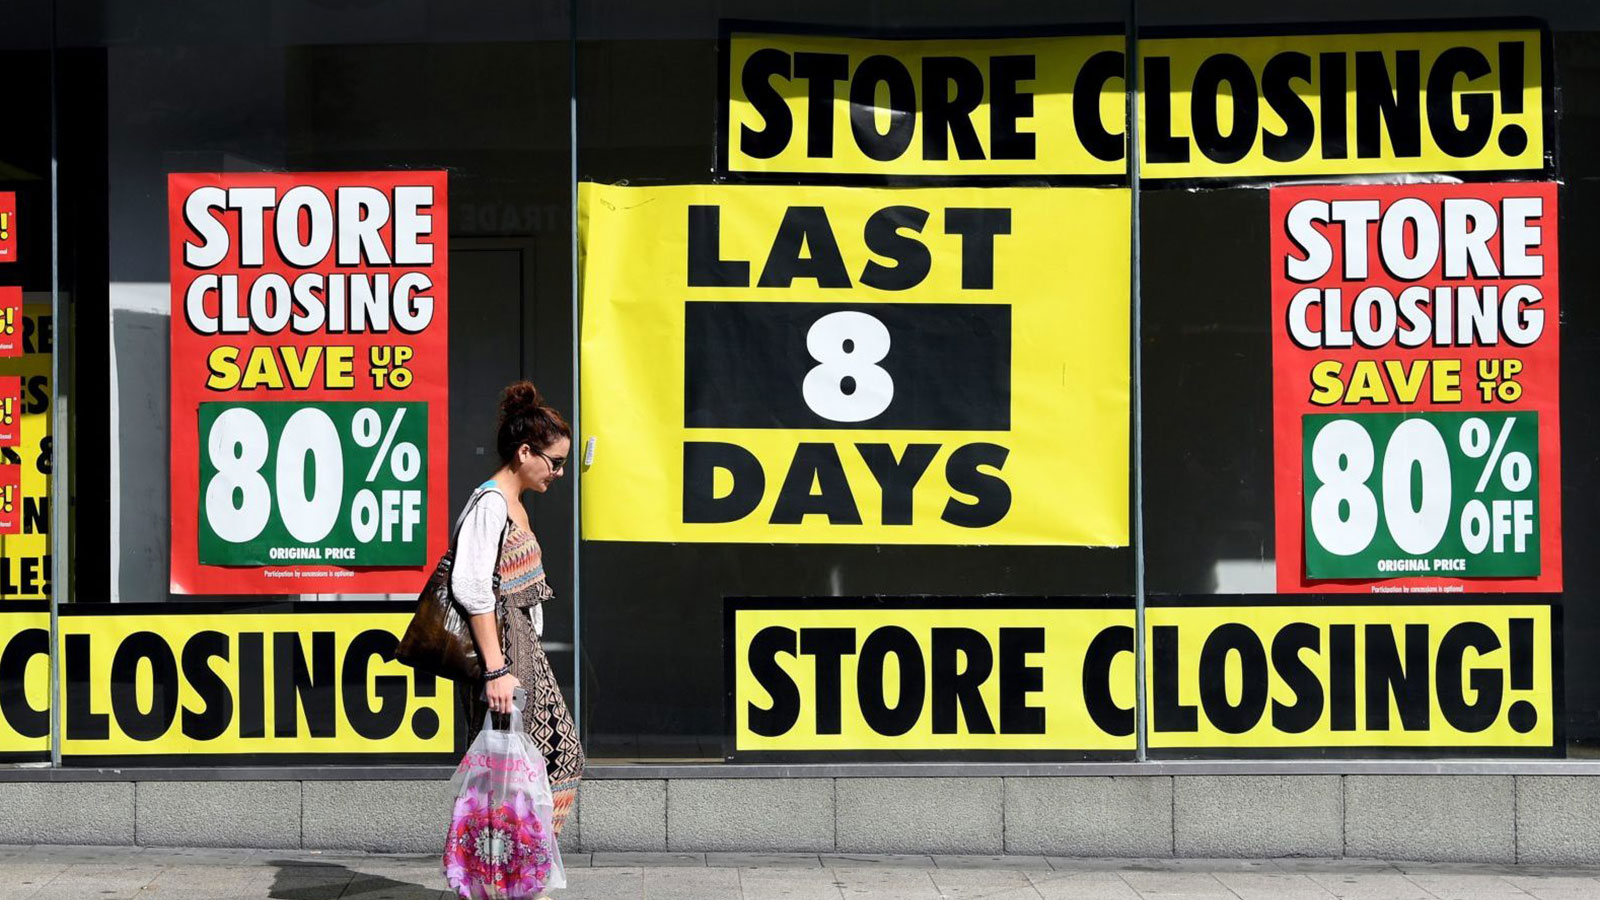 Redefining Retail Over 150 Retail Store Closures Announced